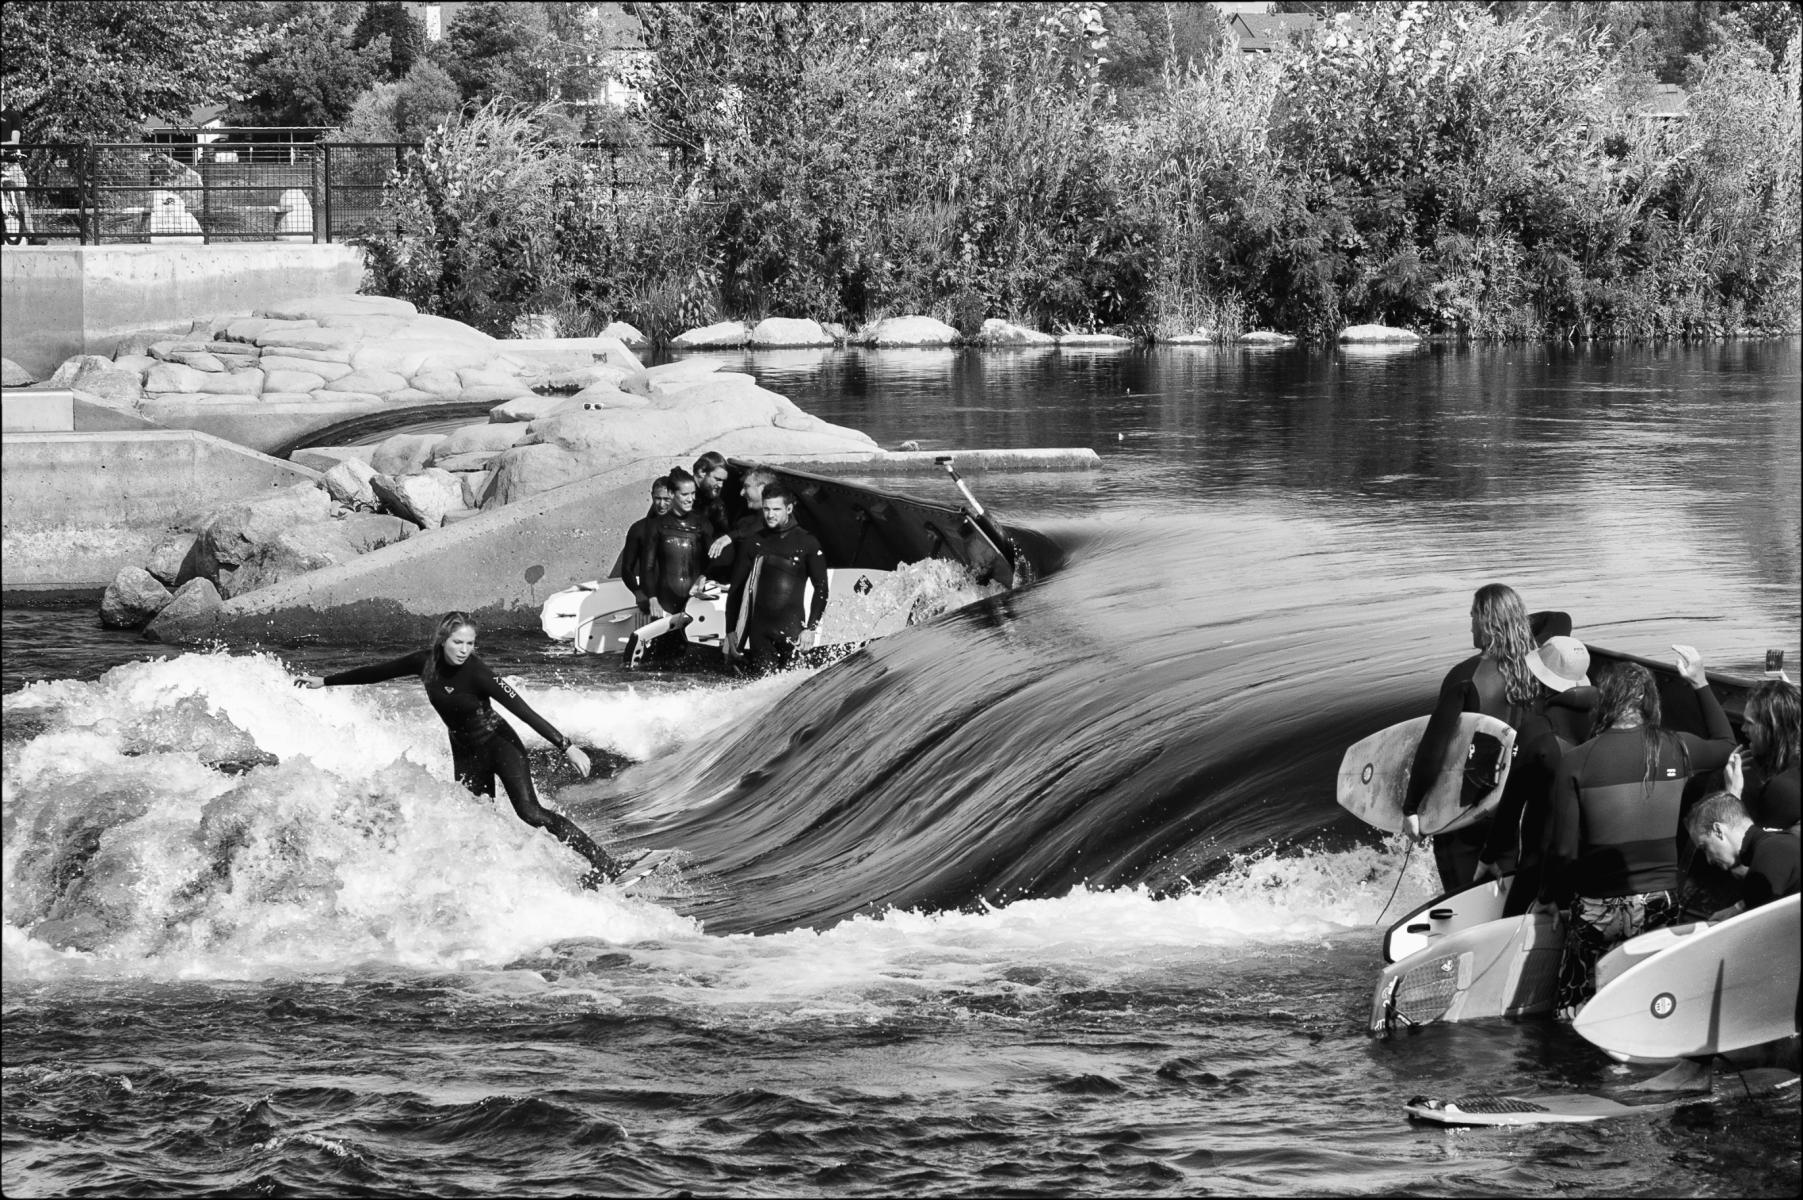 Surfing the Boise River